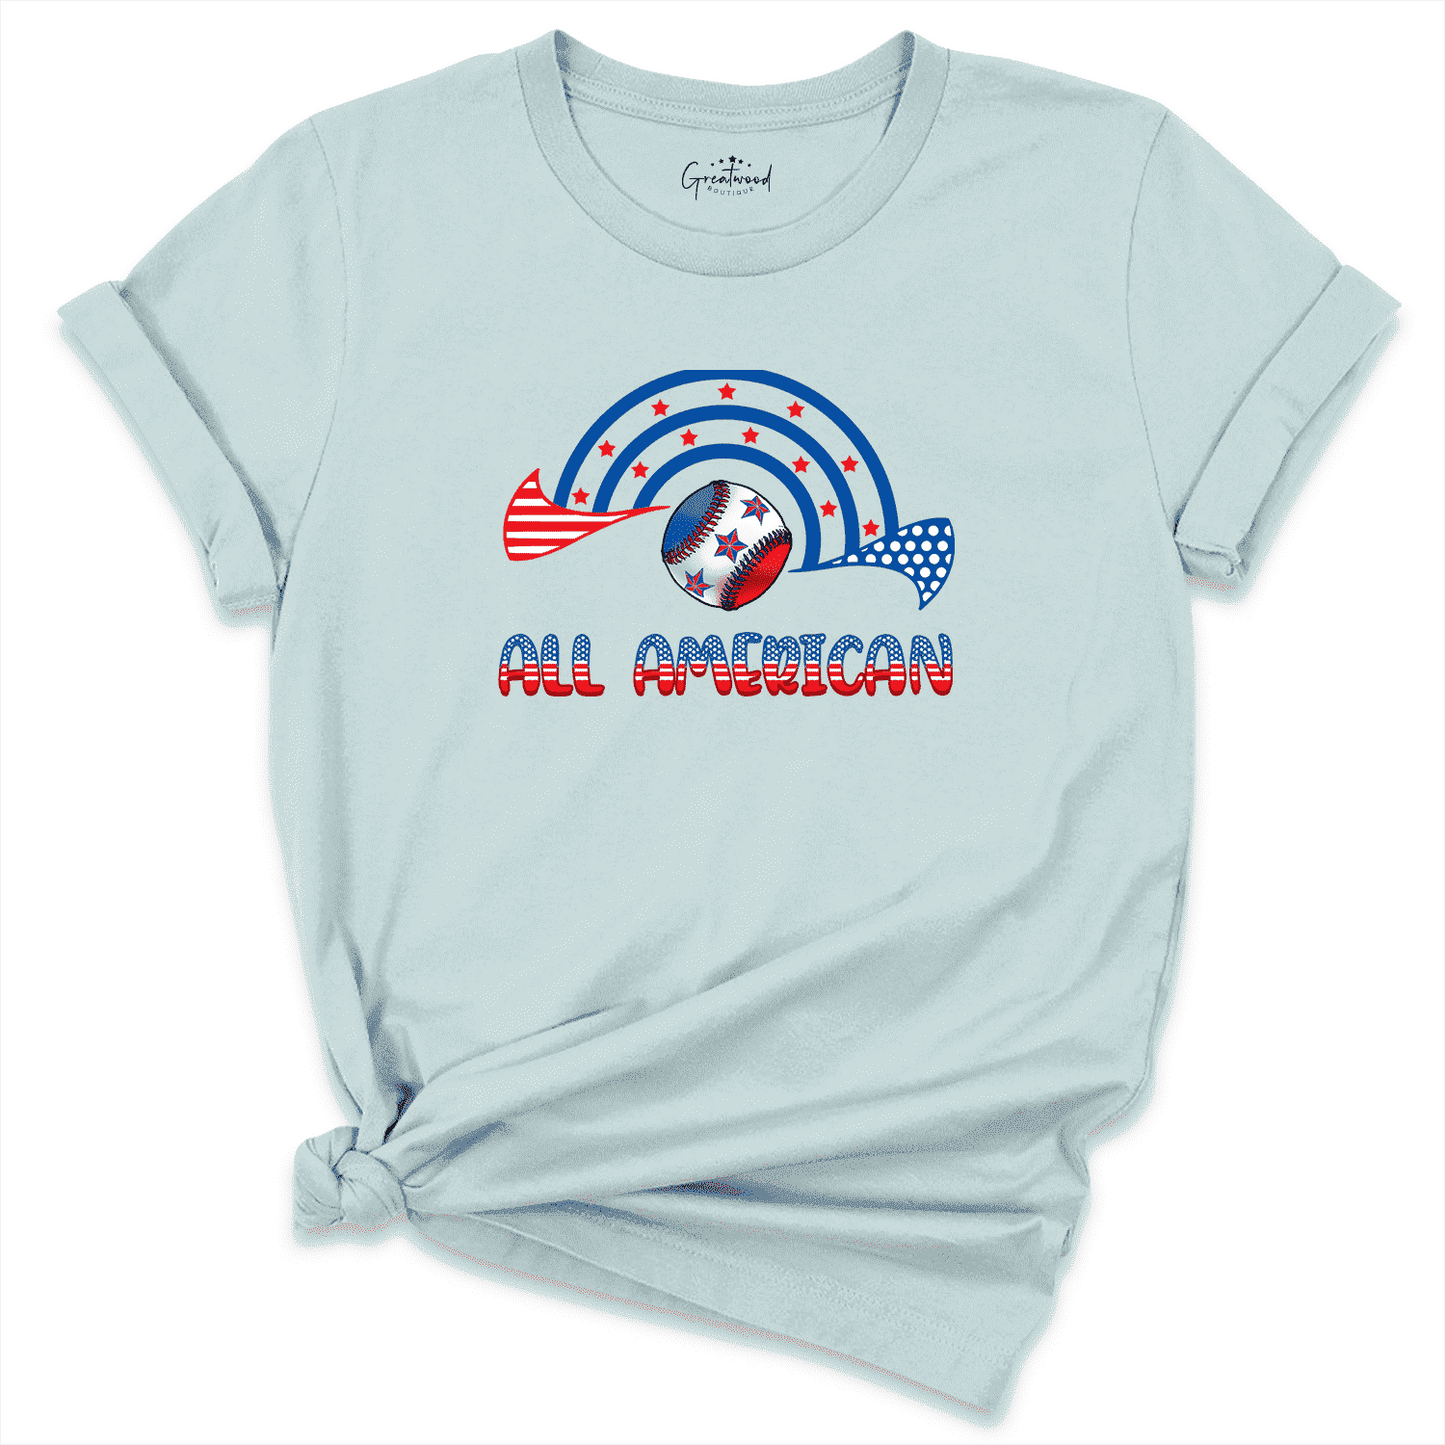 All American Baseball Shirt Blue - Greatwood Boutique